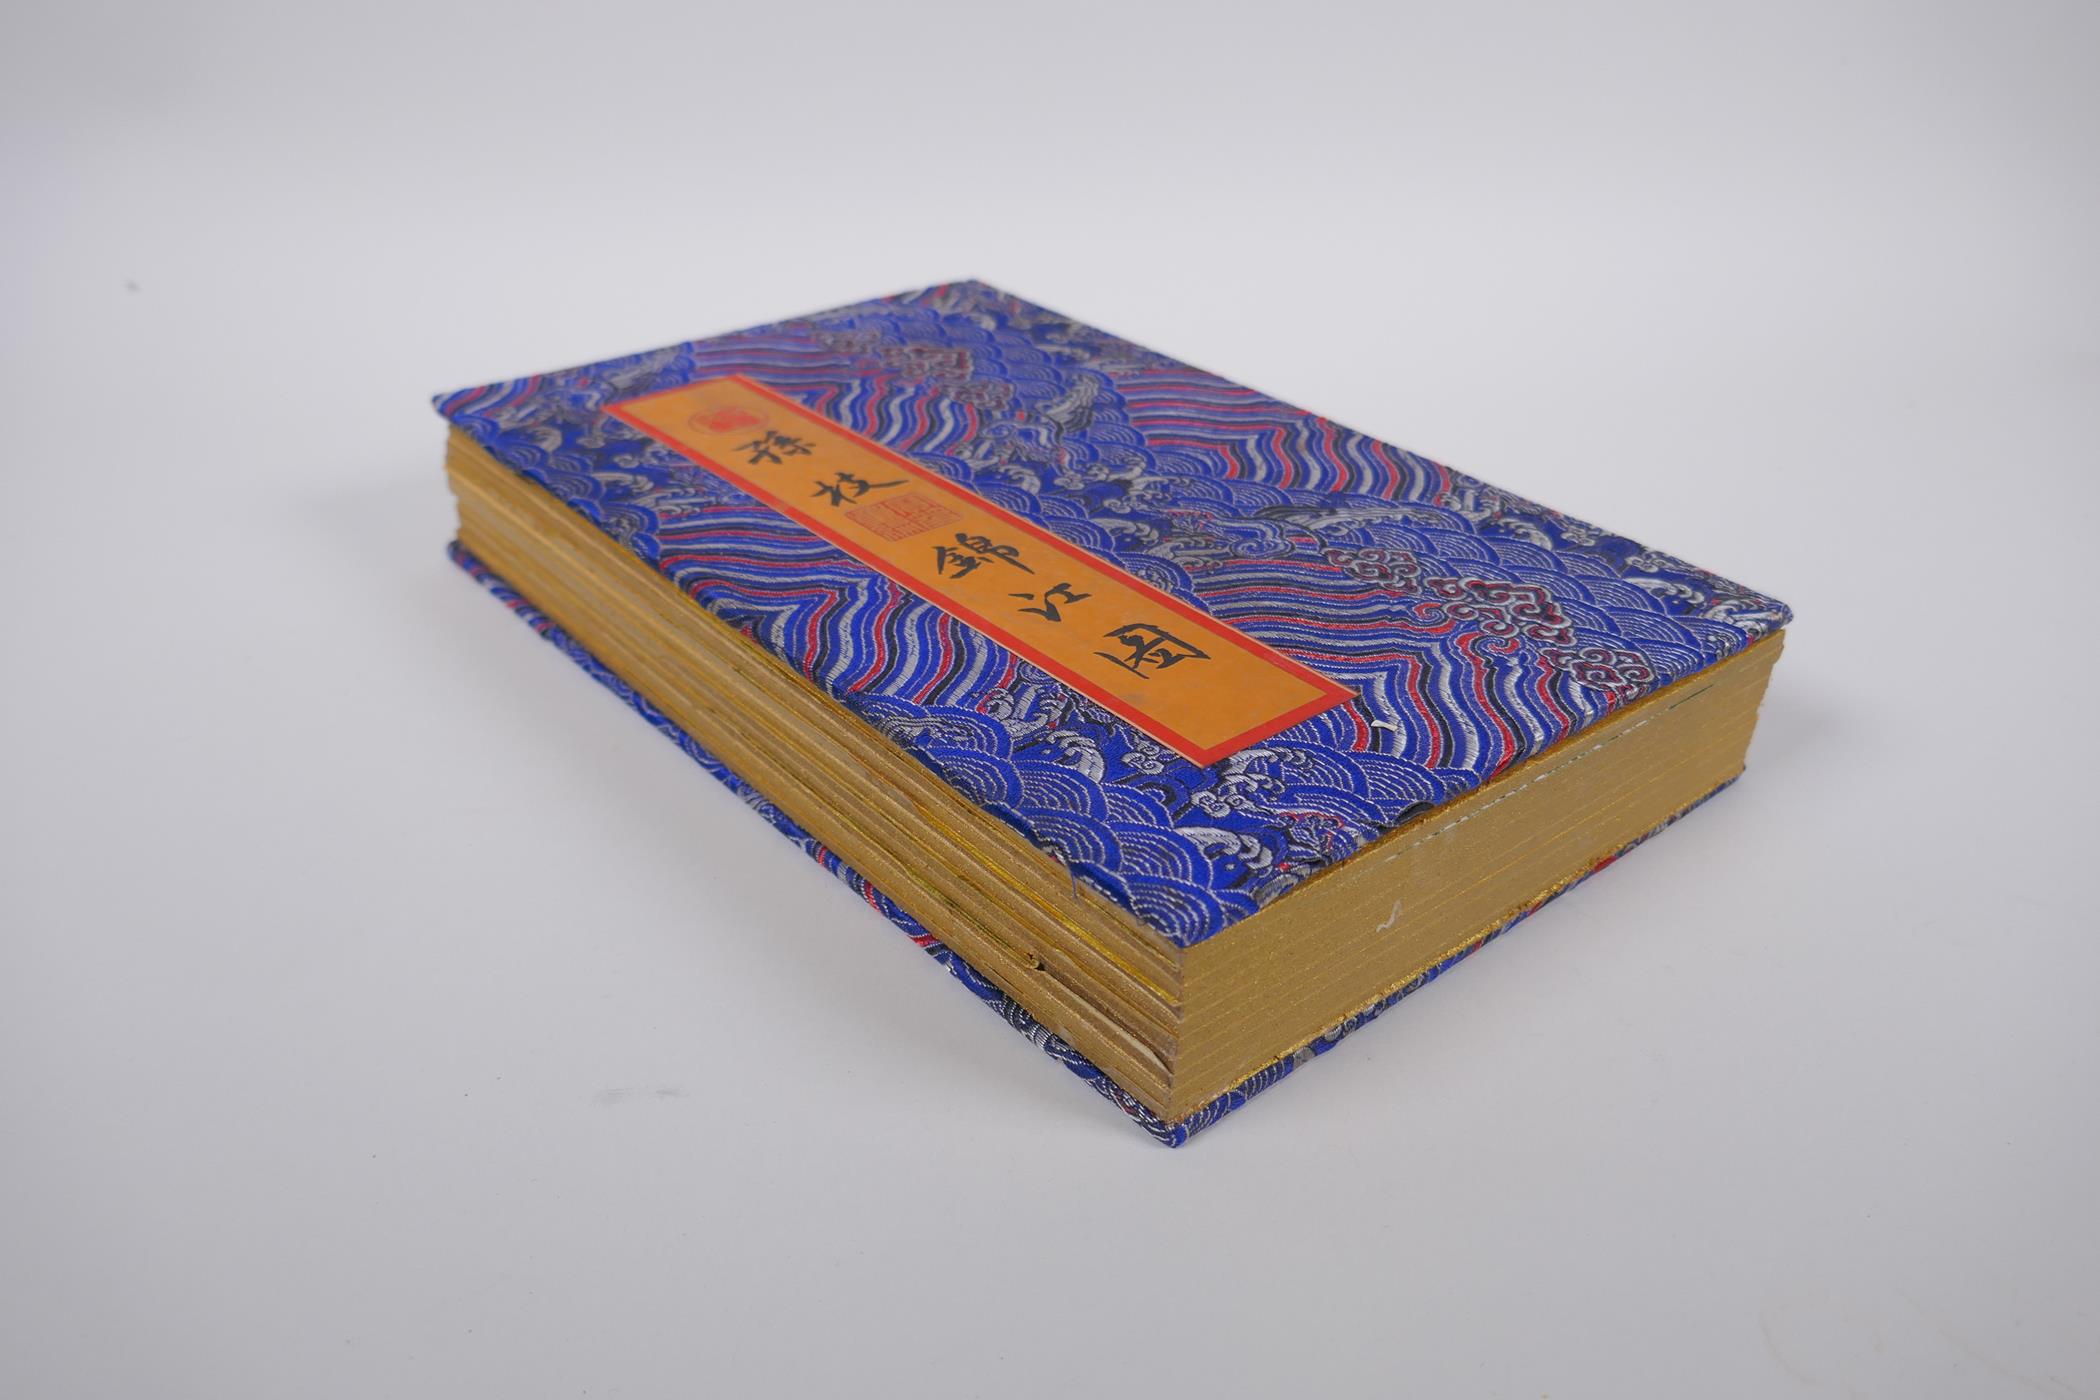 A Chinese printed concertina book decorated with an extensive riverside landscape, 18 x 28cm - Image 3 of 3